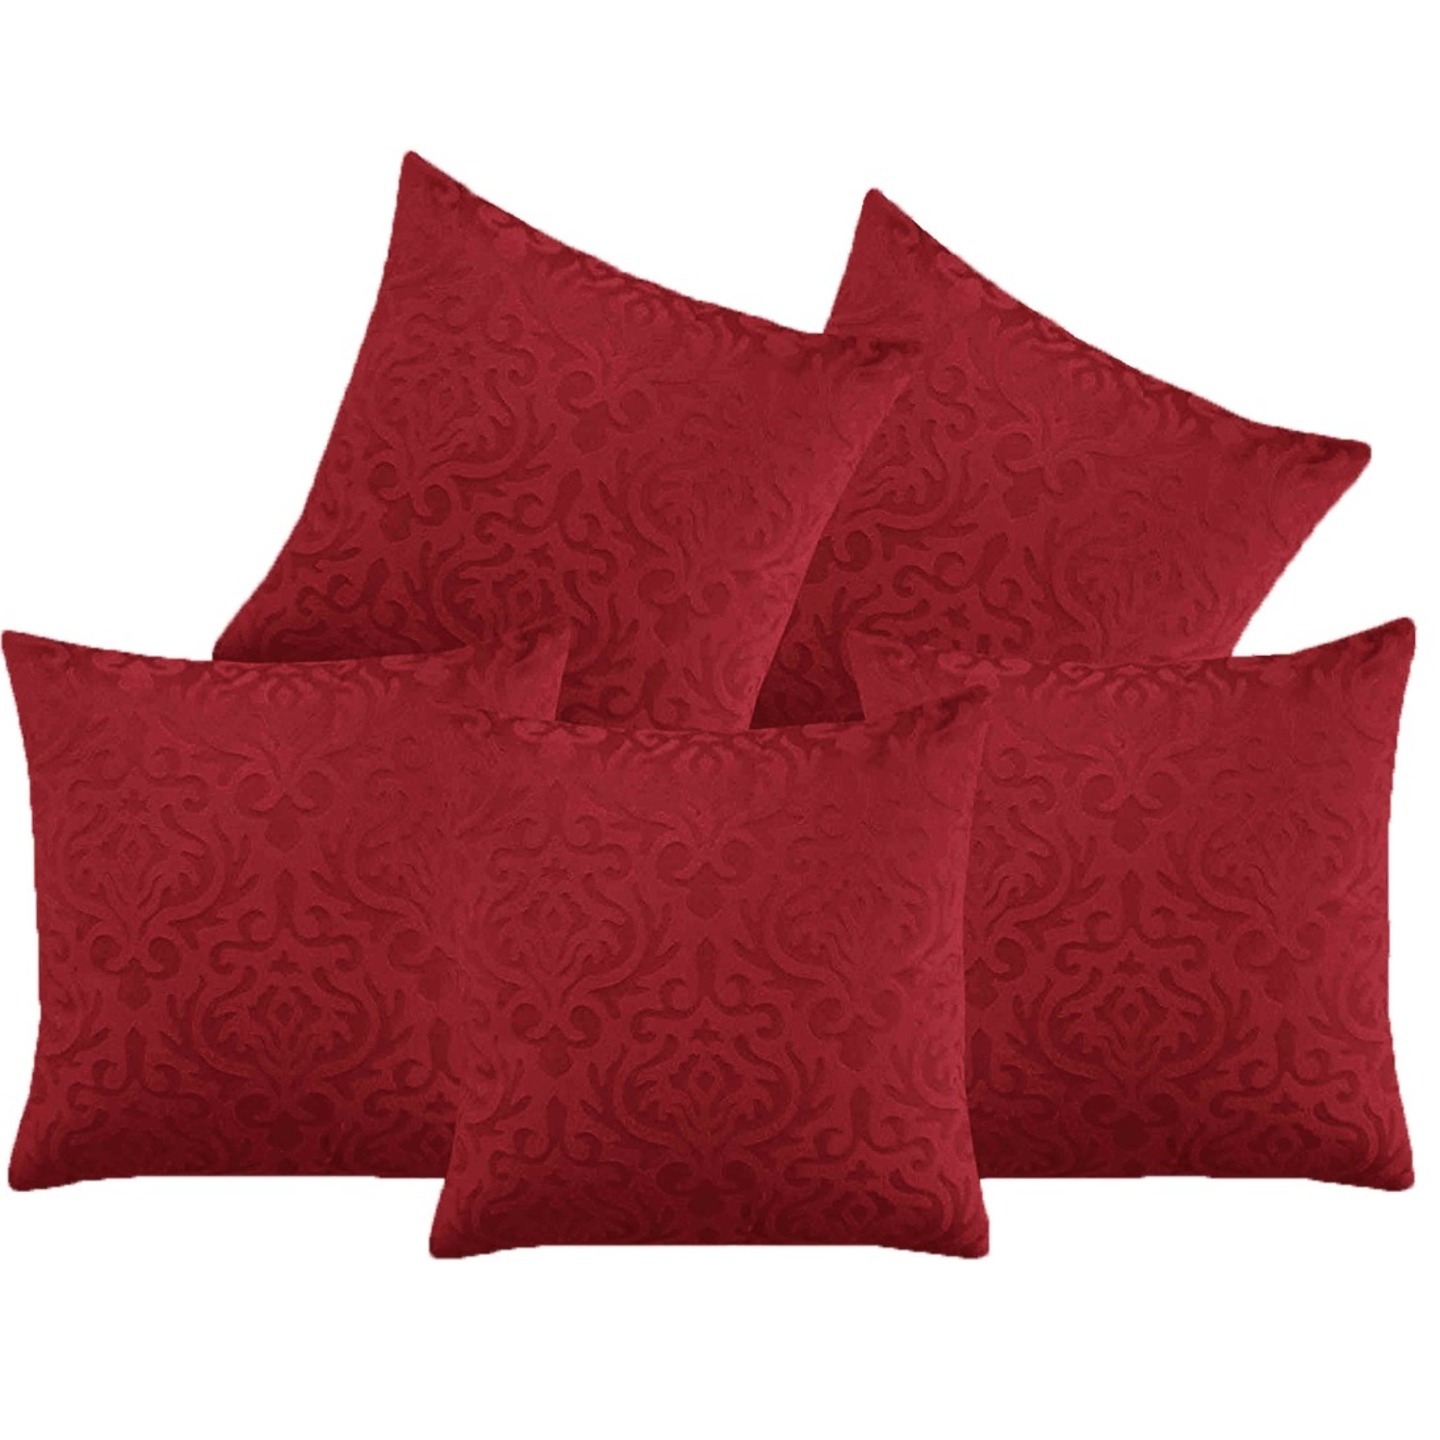 Handtex Home Velvet Cushion Covers (40.64x40.64 cm/16x16 inches, - Set of 5  Maroon